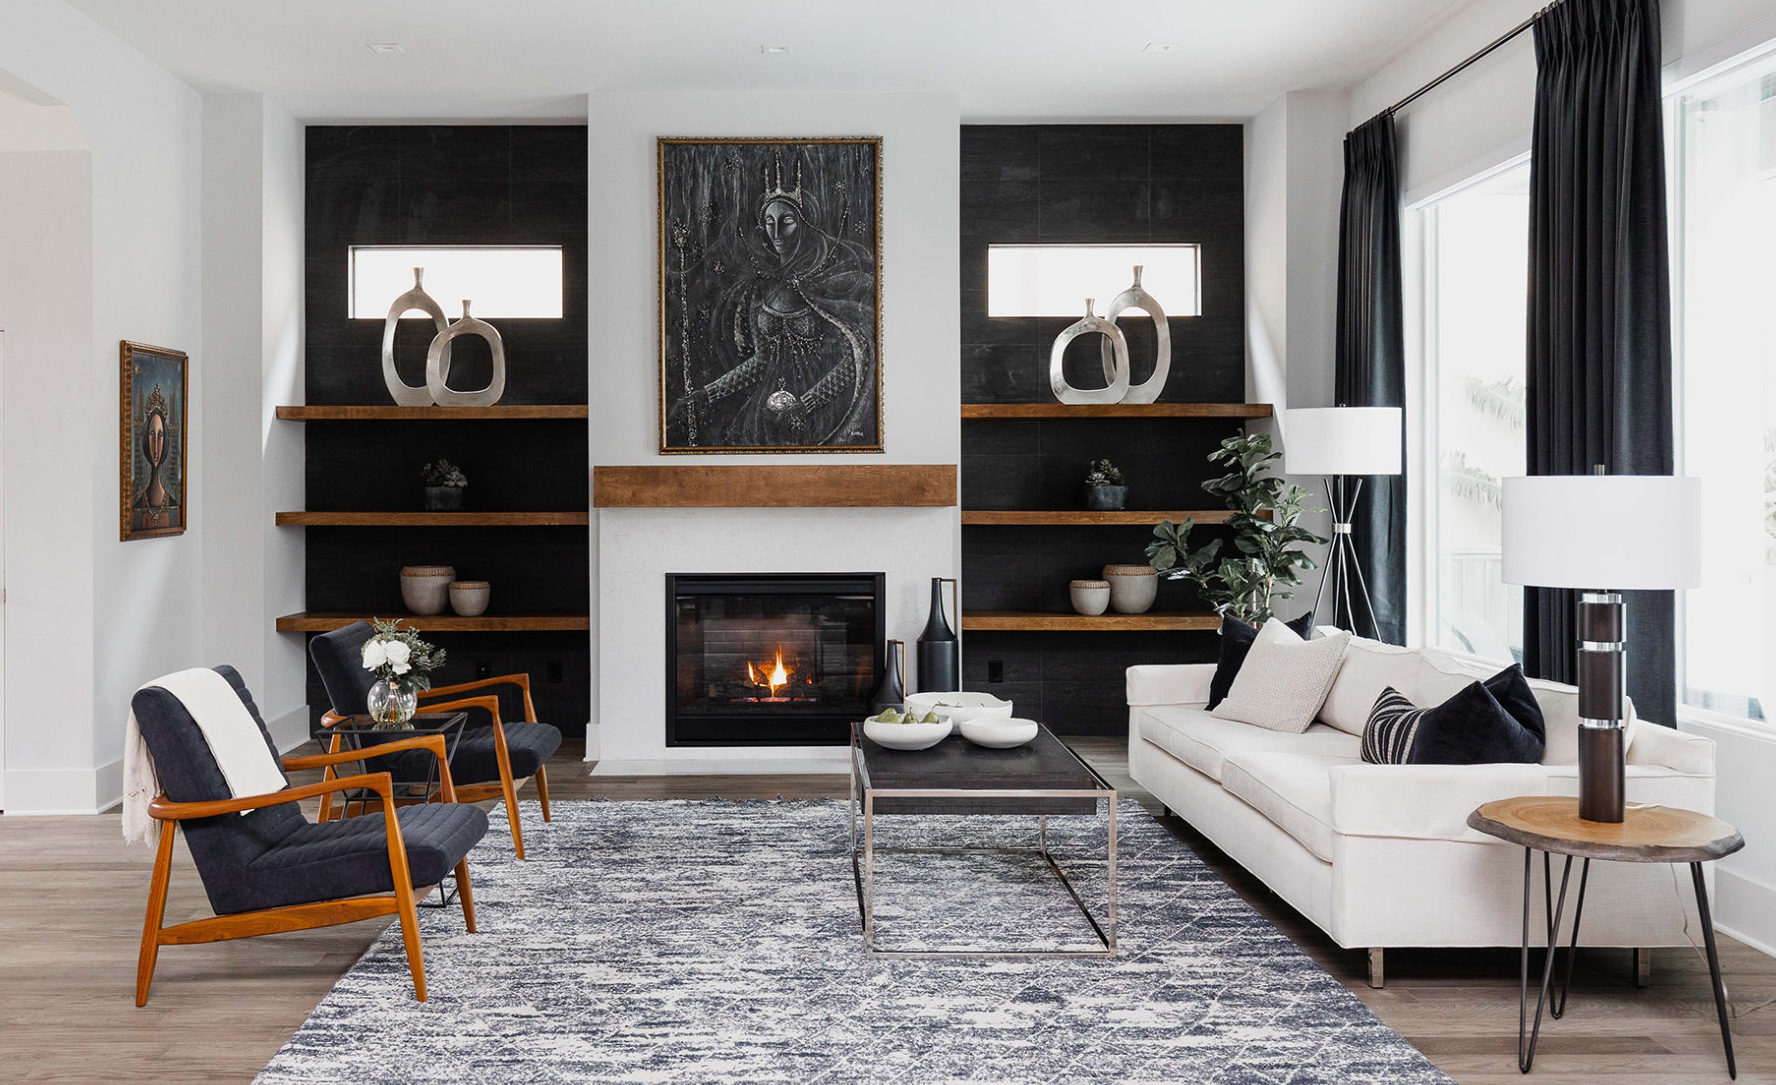 6 top tips to refresh your home fireplace decor